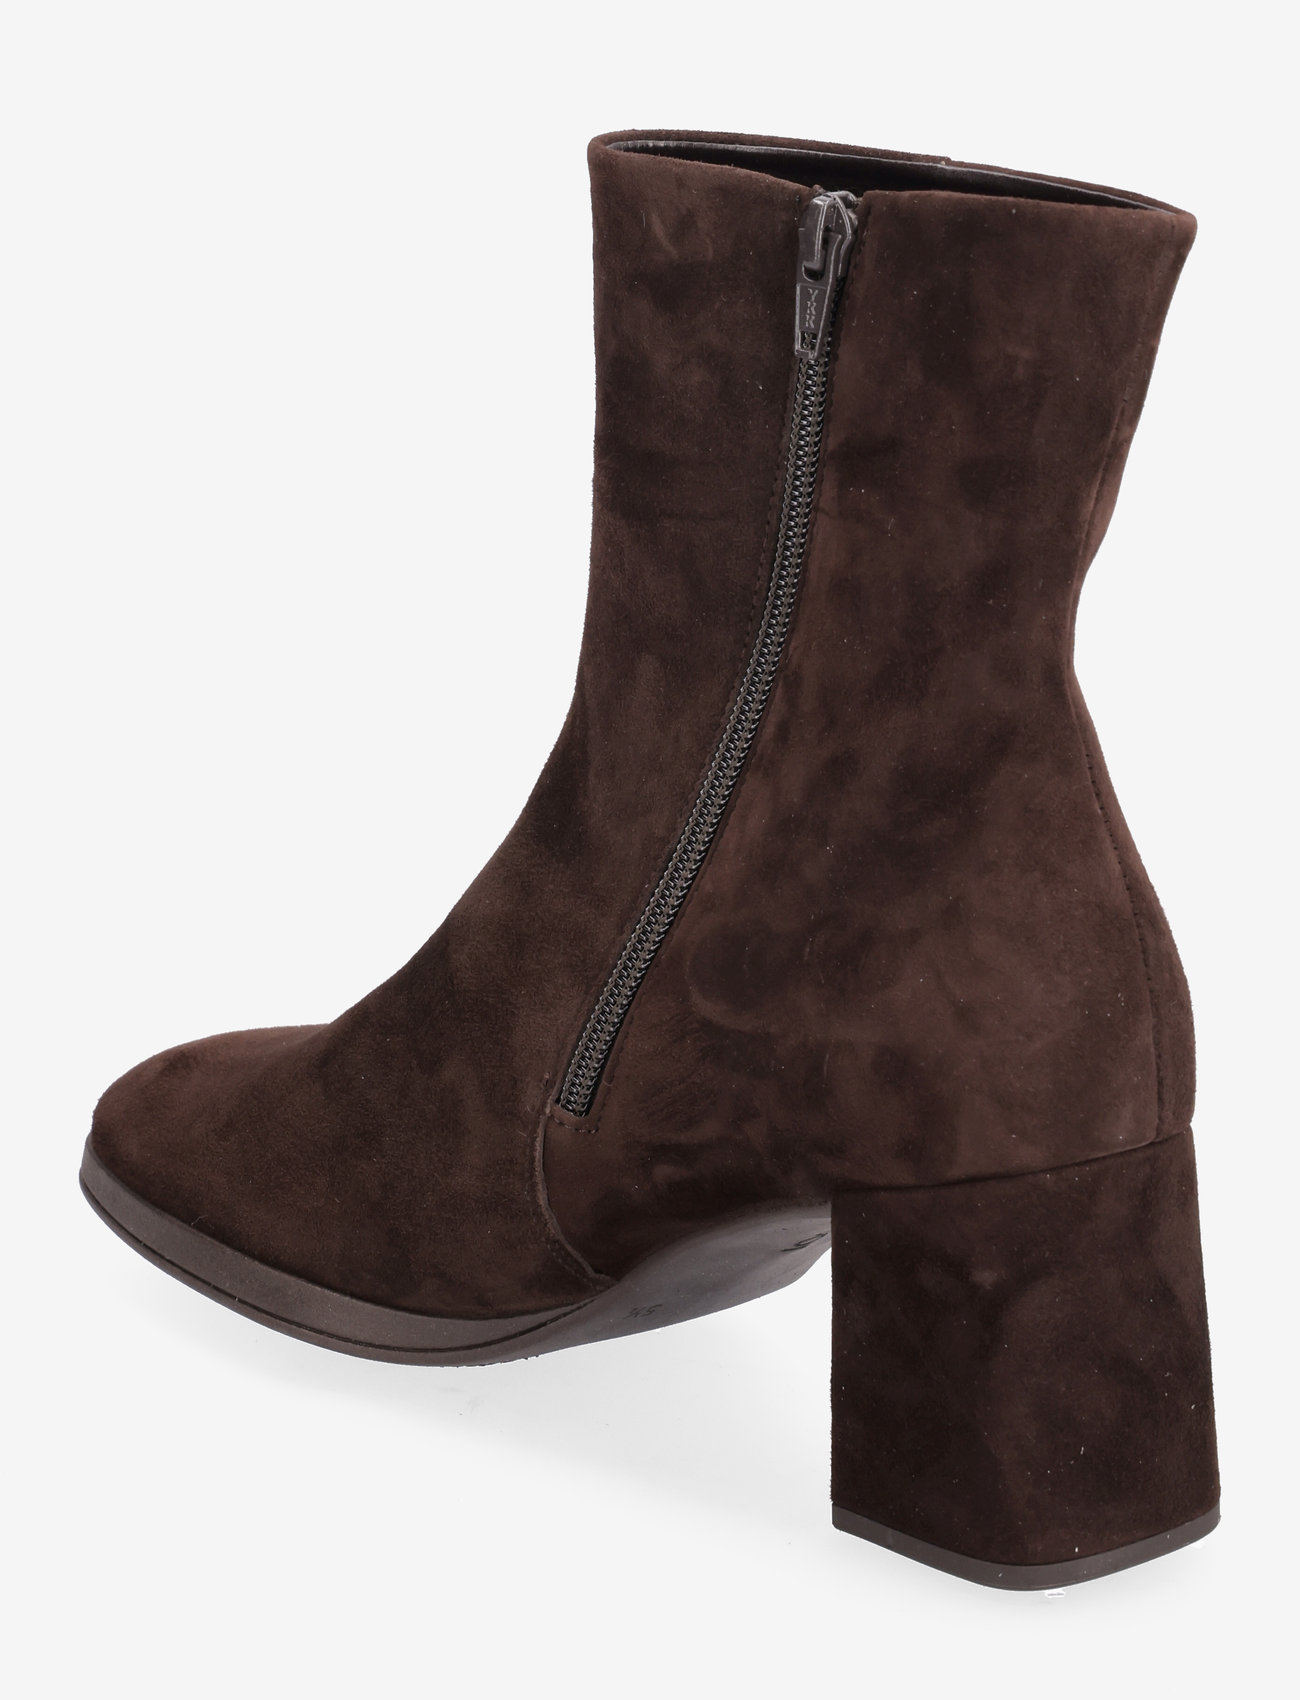 Gabor - Ankle boot - high heel - brown - 1